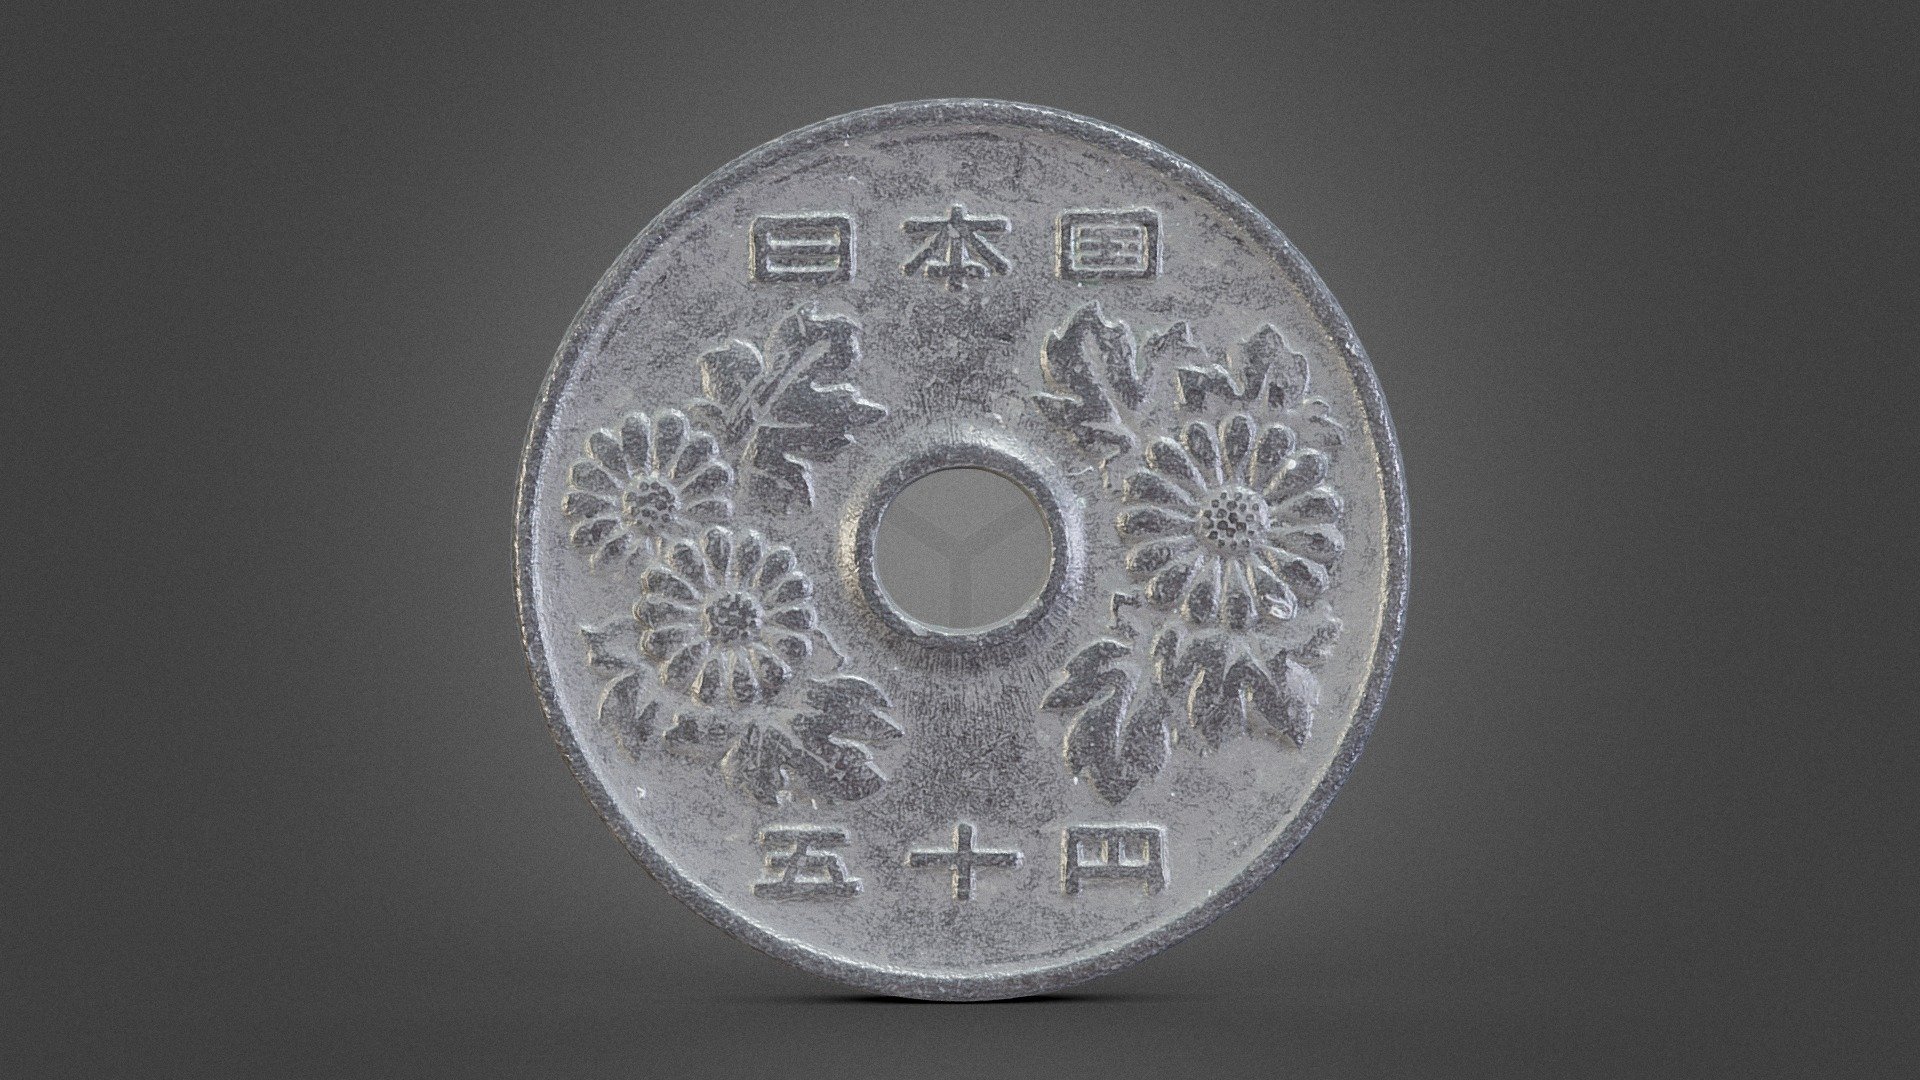 Created in RealityCapture by Capturing Reality from 800 images in 02h:34m:03s.

Raw Scan mesh,

Roughness, Metallic is generated from the diffuse map - RGB.

A7R4, SEL90M28G, AR400, Cross Polarization

it is a 50 yen coin, the value is 50 yen (Half dollar).

50円玉なので価値/値段は50円 - 50 Yen Cupronickel Coin (1967) - 3D model by Yu (@FFT_kedar) 3d model